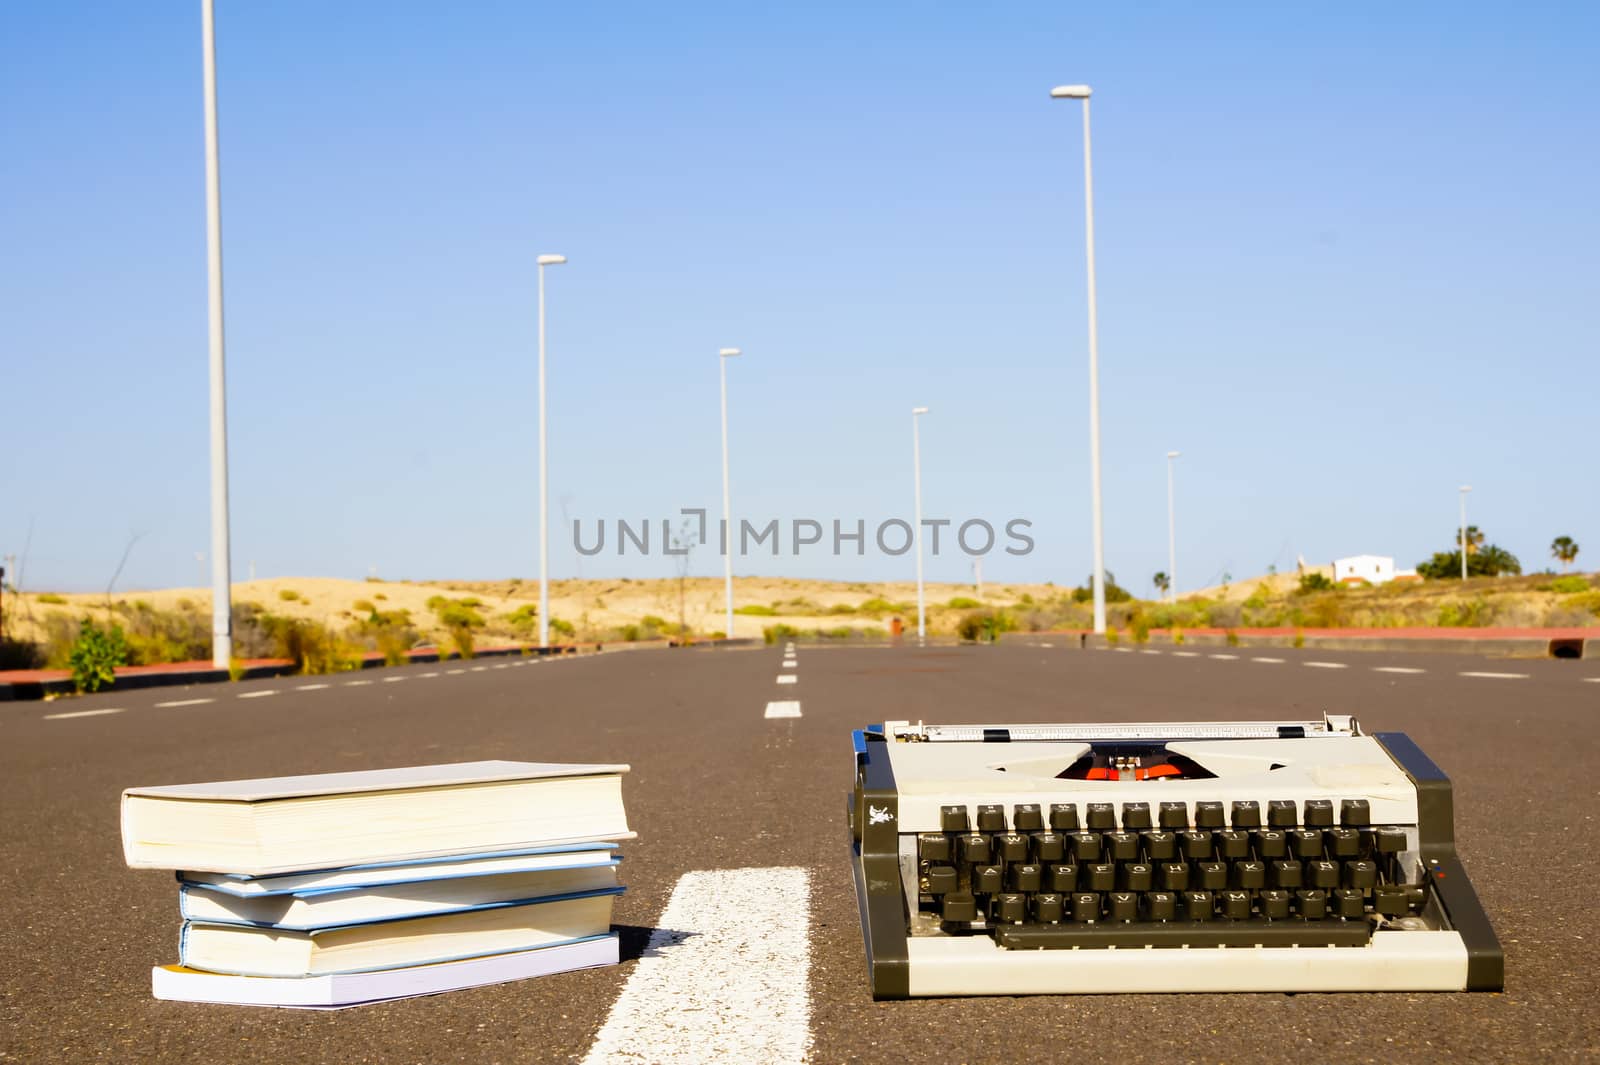 On the Road Writing Concept Typewriter over an Asphalt Street